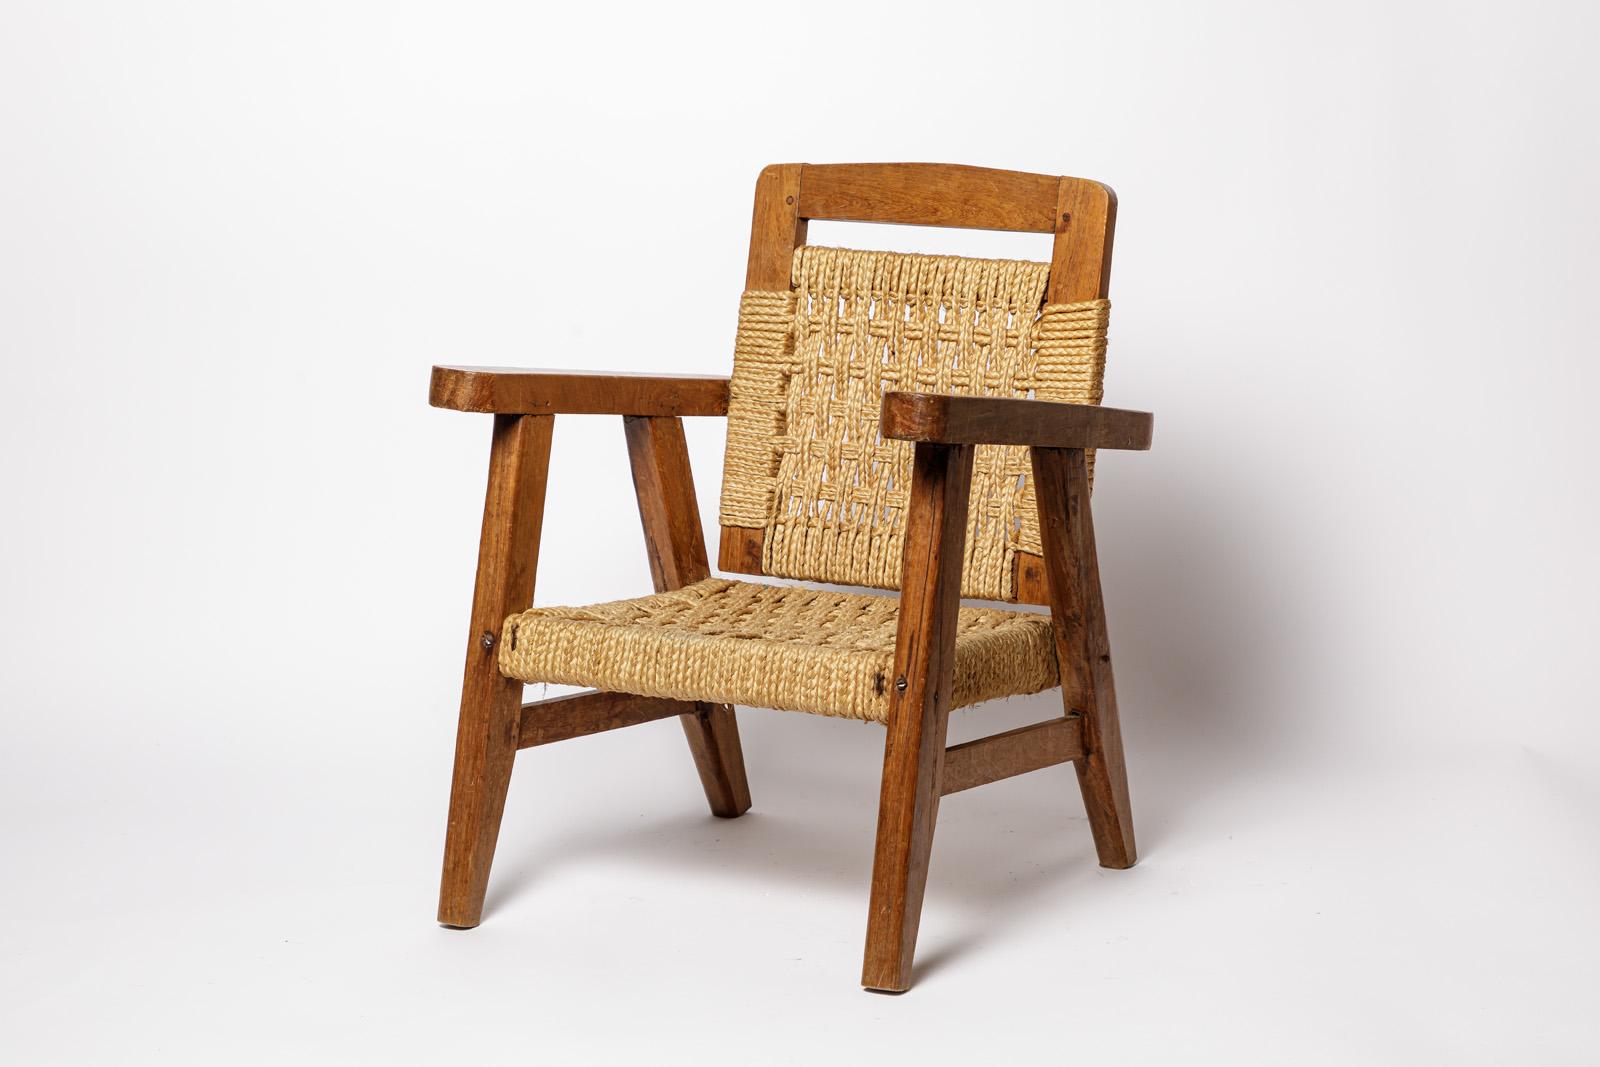 attributed to Audoux Minnet 2/2

20th century design lounge chair for children

Wood and cord design

circa 1970

Original good condition

Height 46 cm
Large 40 cm
Depth 34 cm

Seat height 20 cm